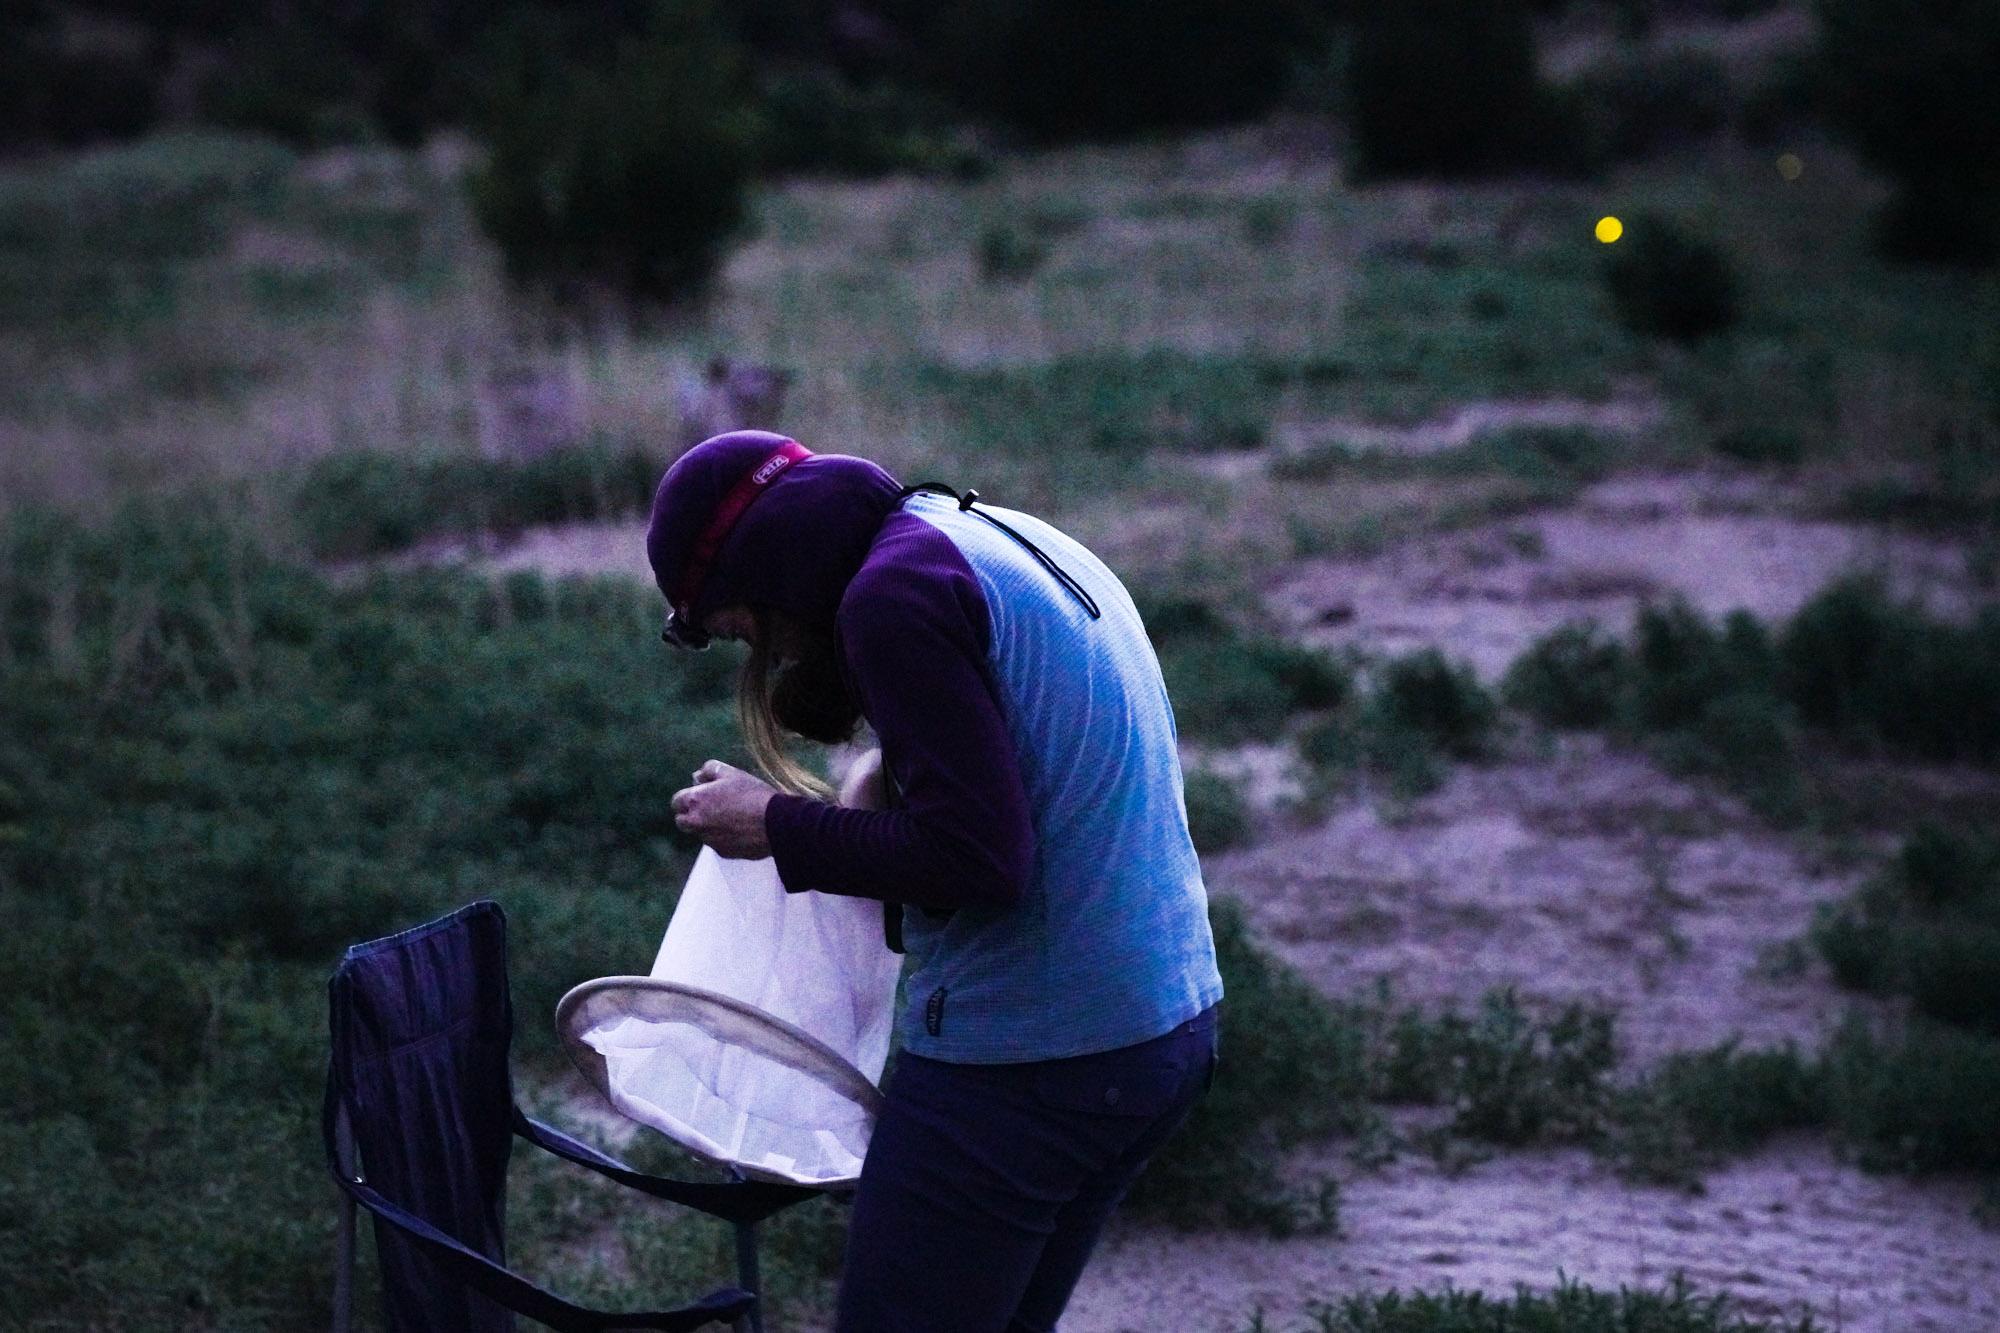 Chasing fireflies in the hidden corners of the dry, dry West